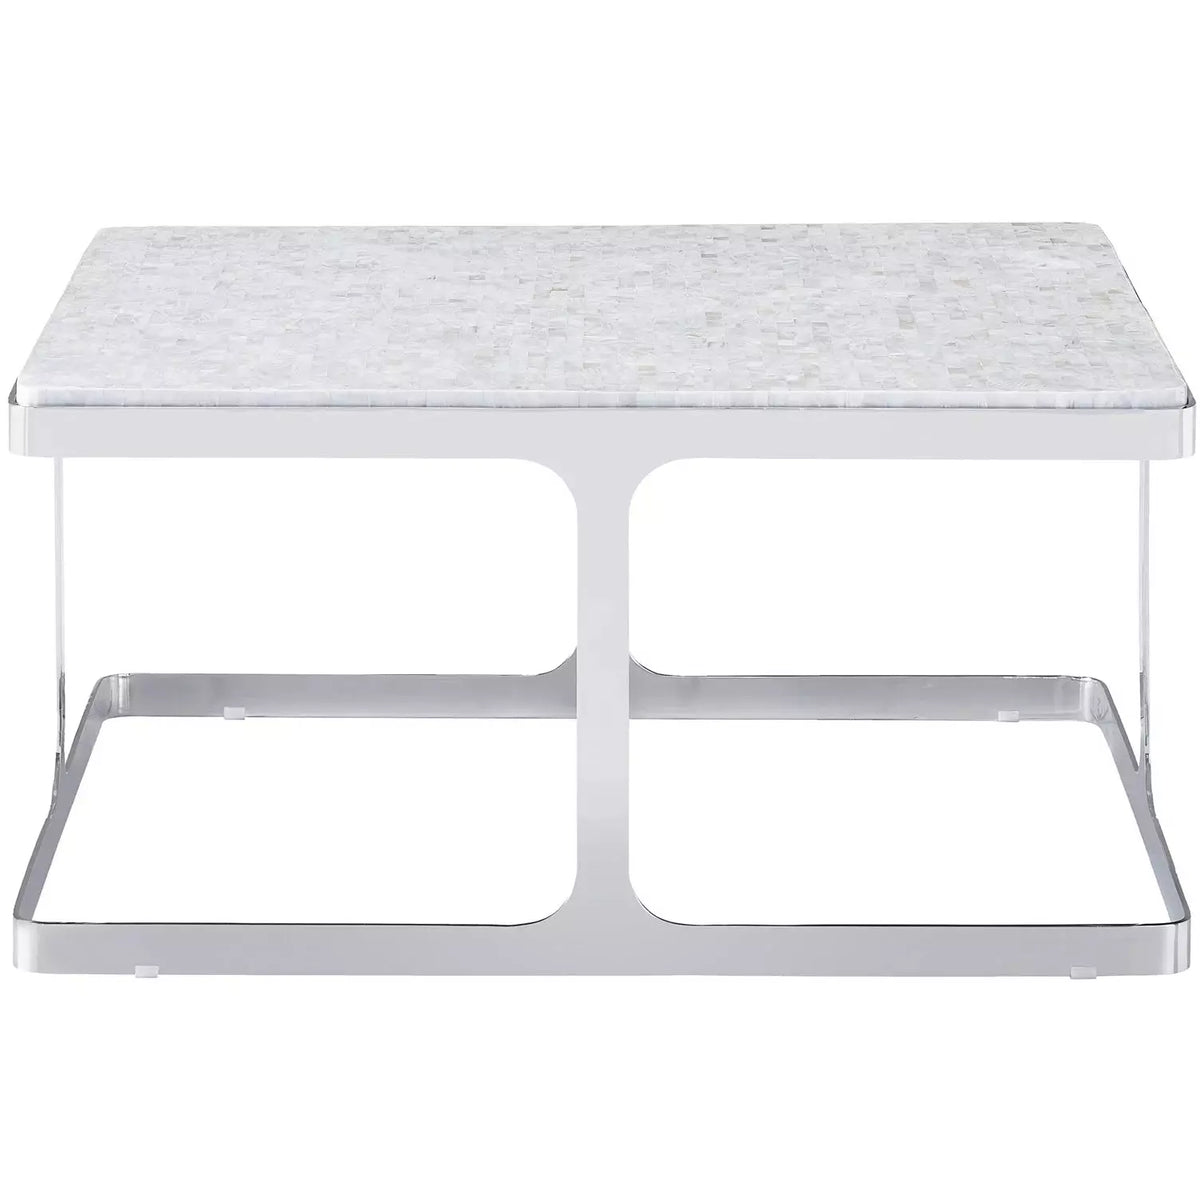 Impressionist Square Cocktail Table - Be Bold Furniture